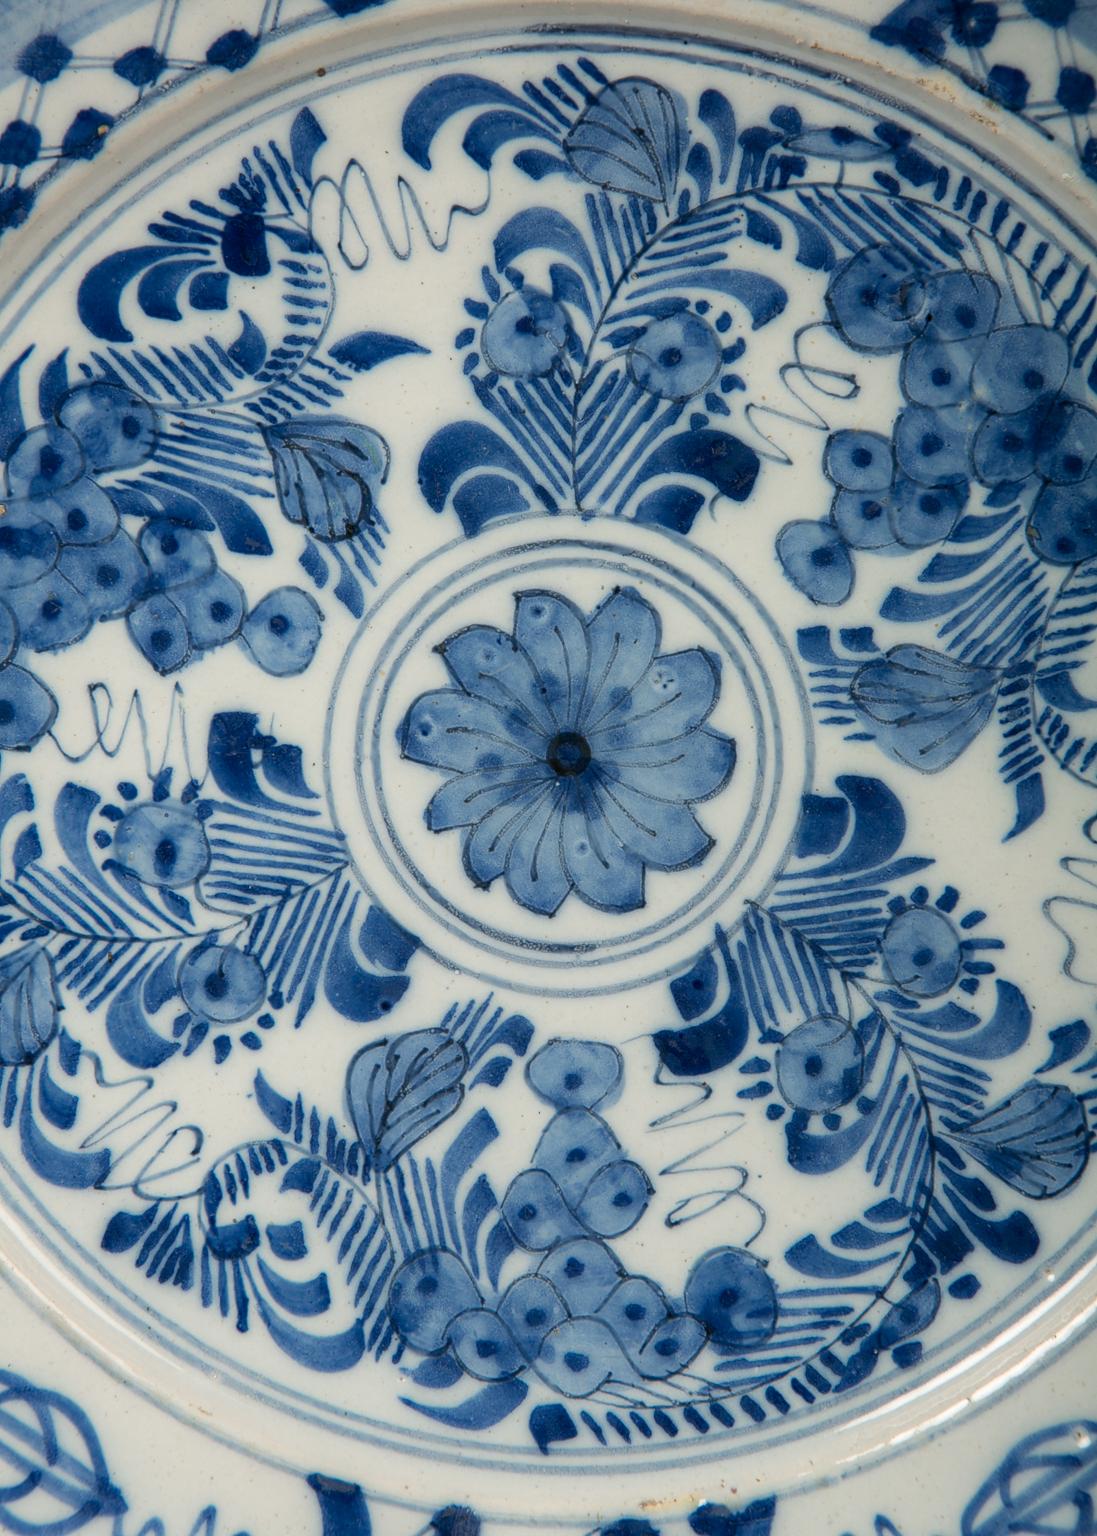 We are pleased to offer this pair of antique Dutch Delft blue and white pancake plates fully painted with a chrysanthemum encircled by flowering plants. The wide border is decorated with 